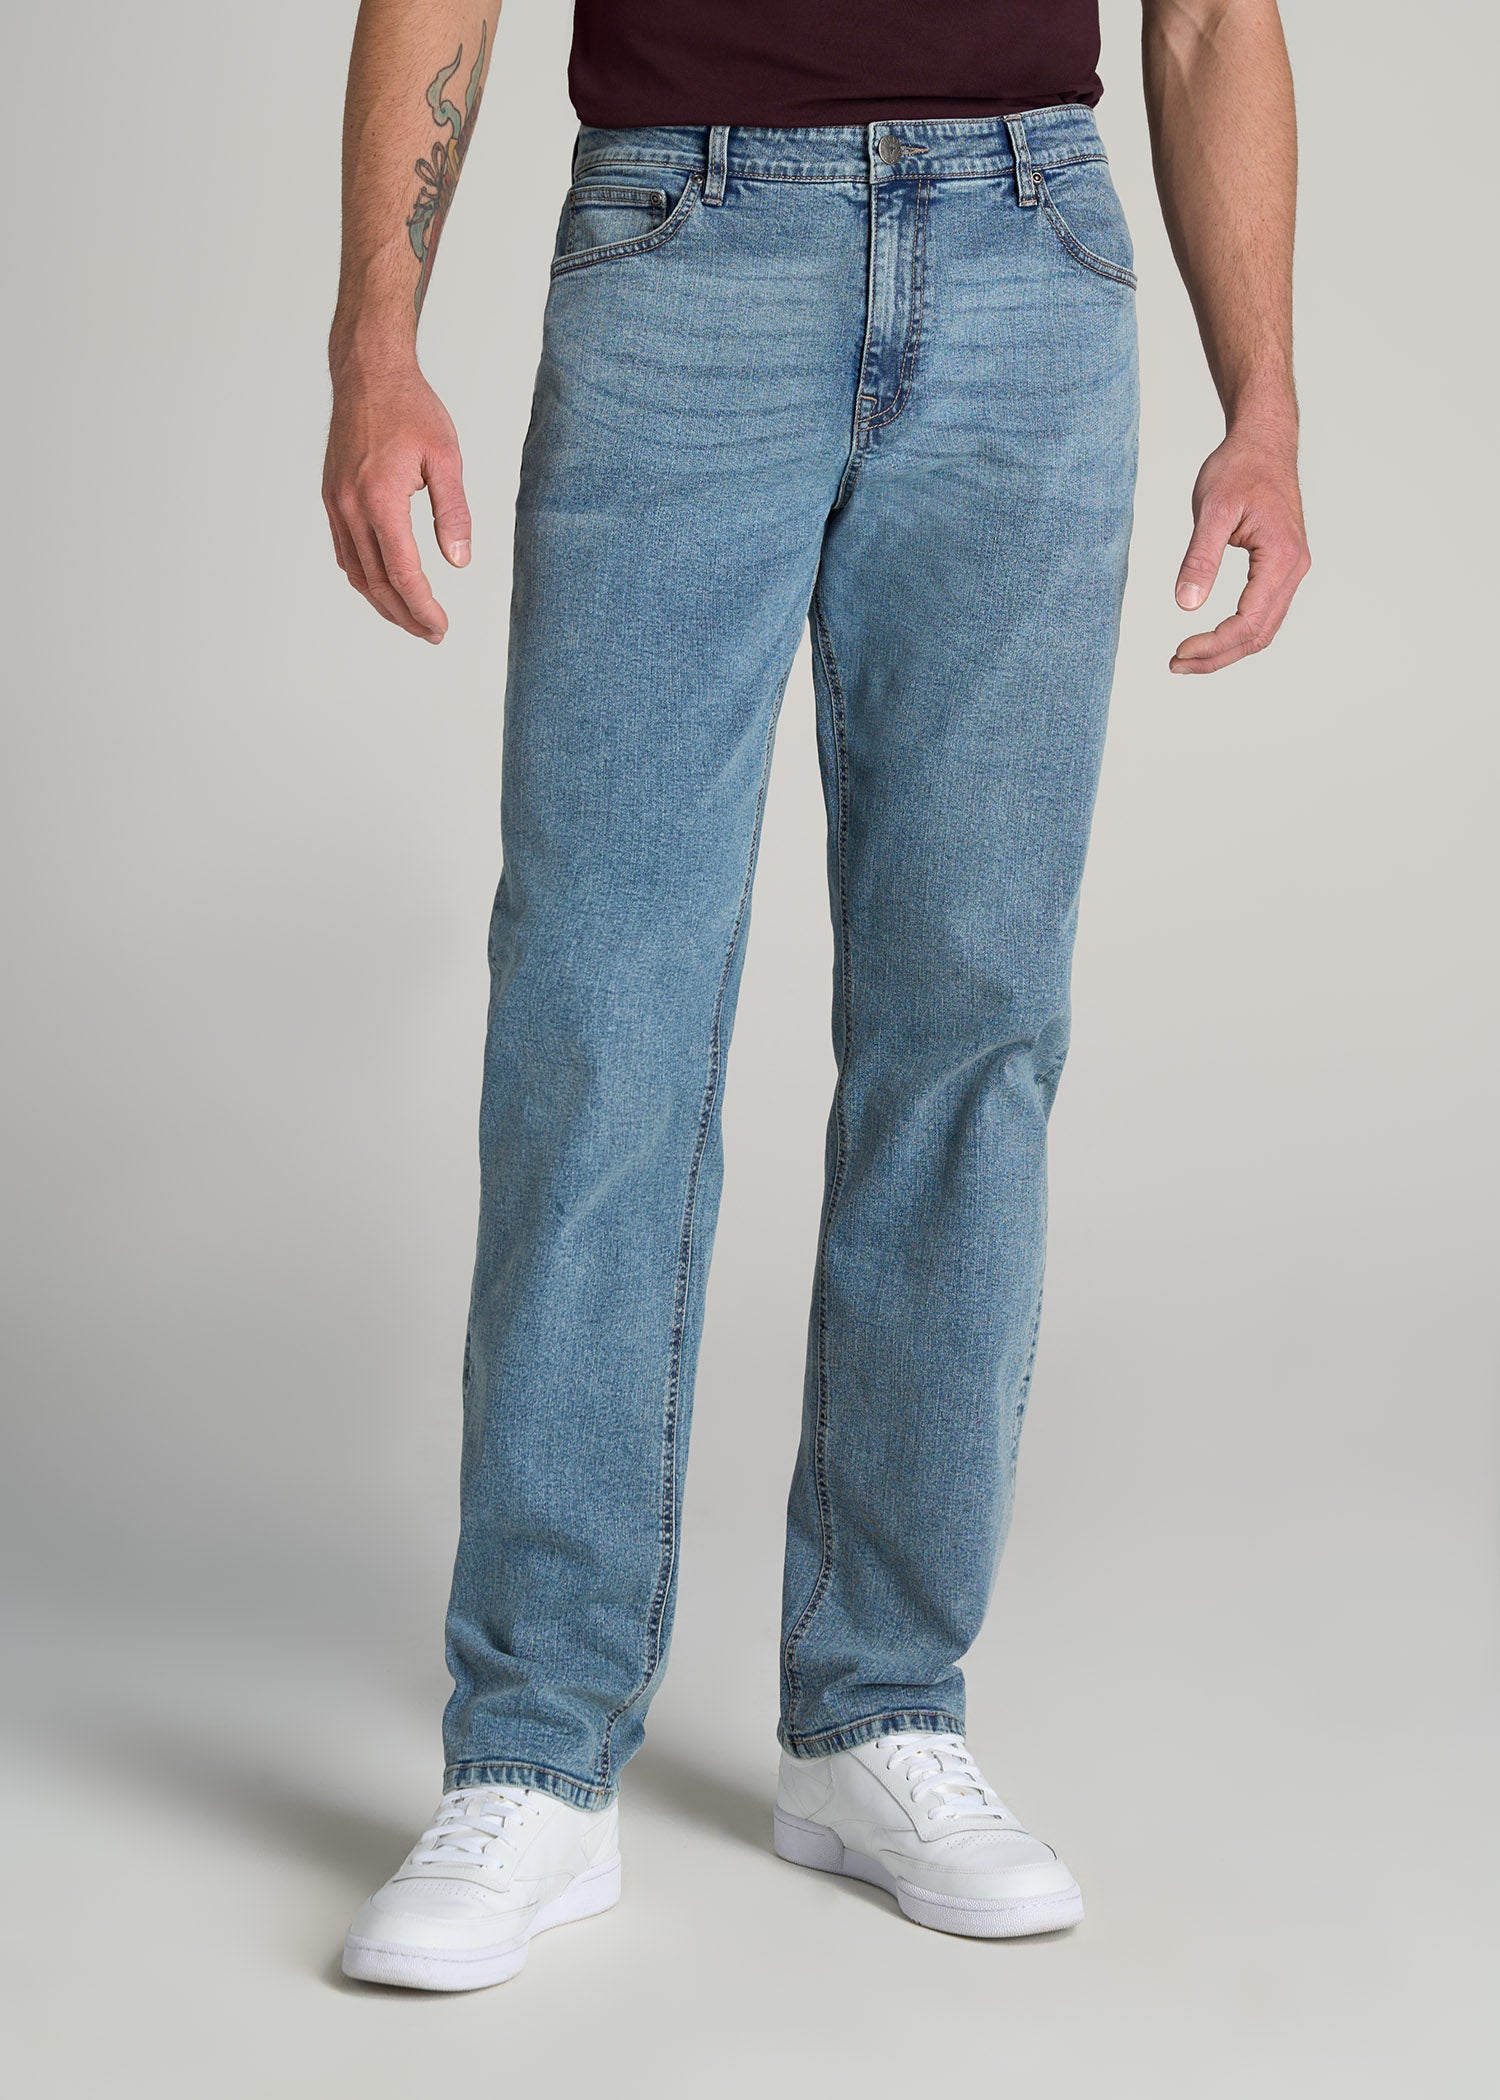 Men's Tall Semi-Relaxed Jeans Vintage Faded Blue